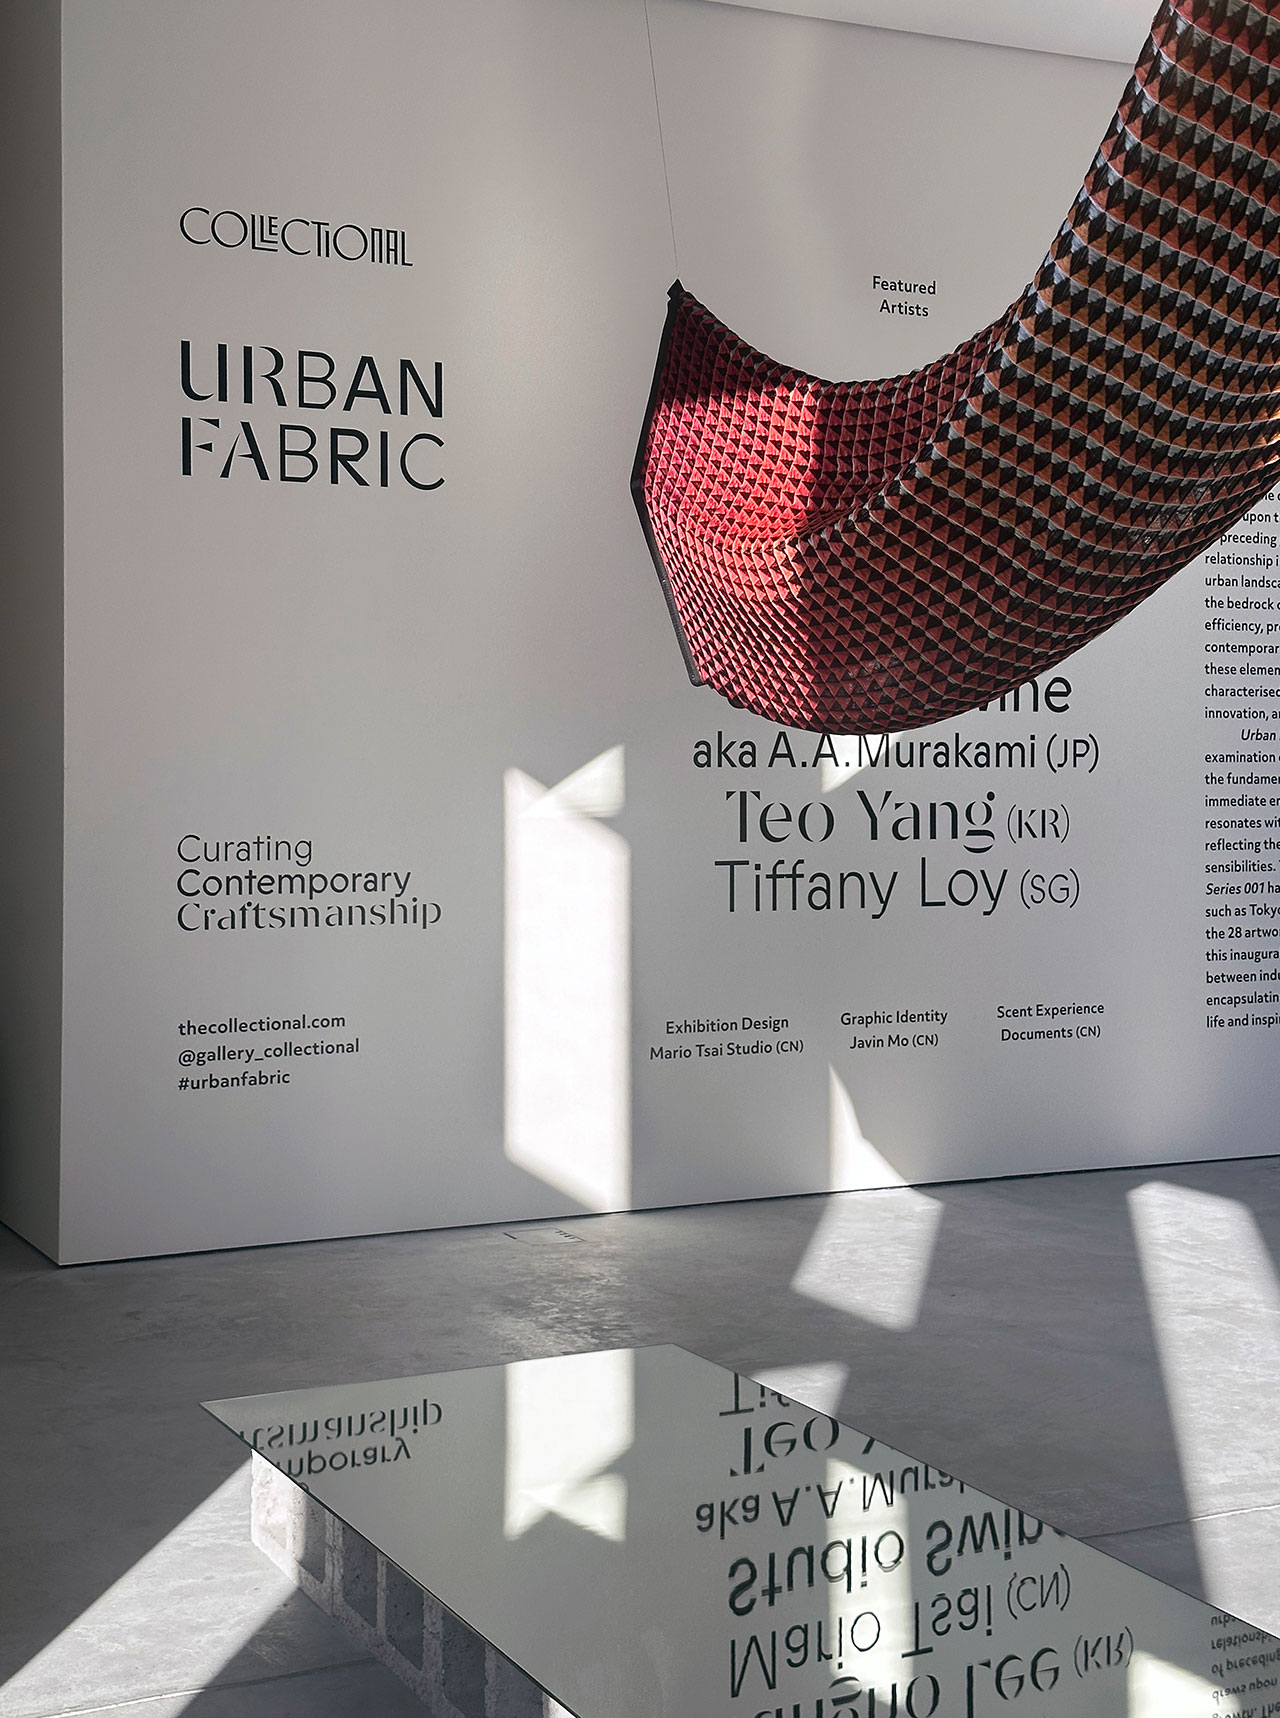 Exhibition view. Urban Fabric Series 001 at Gallery Collectional, Dubai. © Mario Tsai Studio.
Featured:
Night, 2024, by Tiffany Loy. Silk and cotton, powder-coated aluminium, 670 x 3000 x 670 mm. Edition of 6.